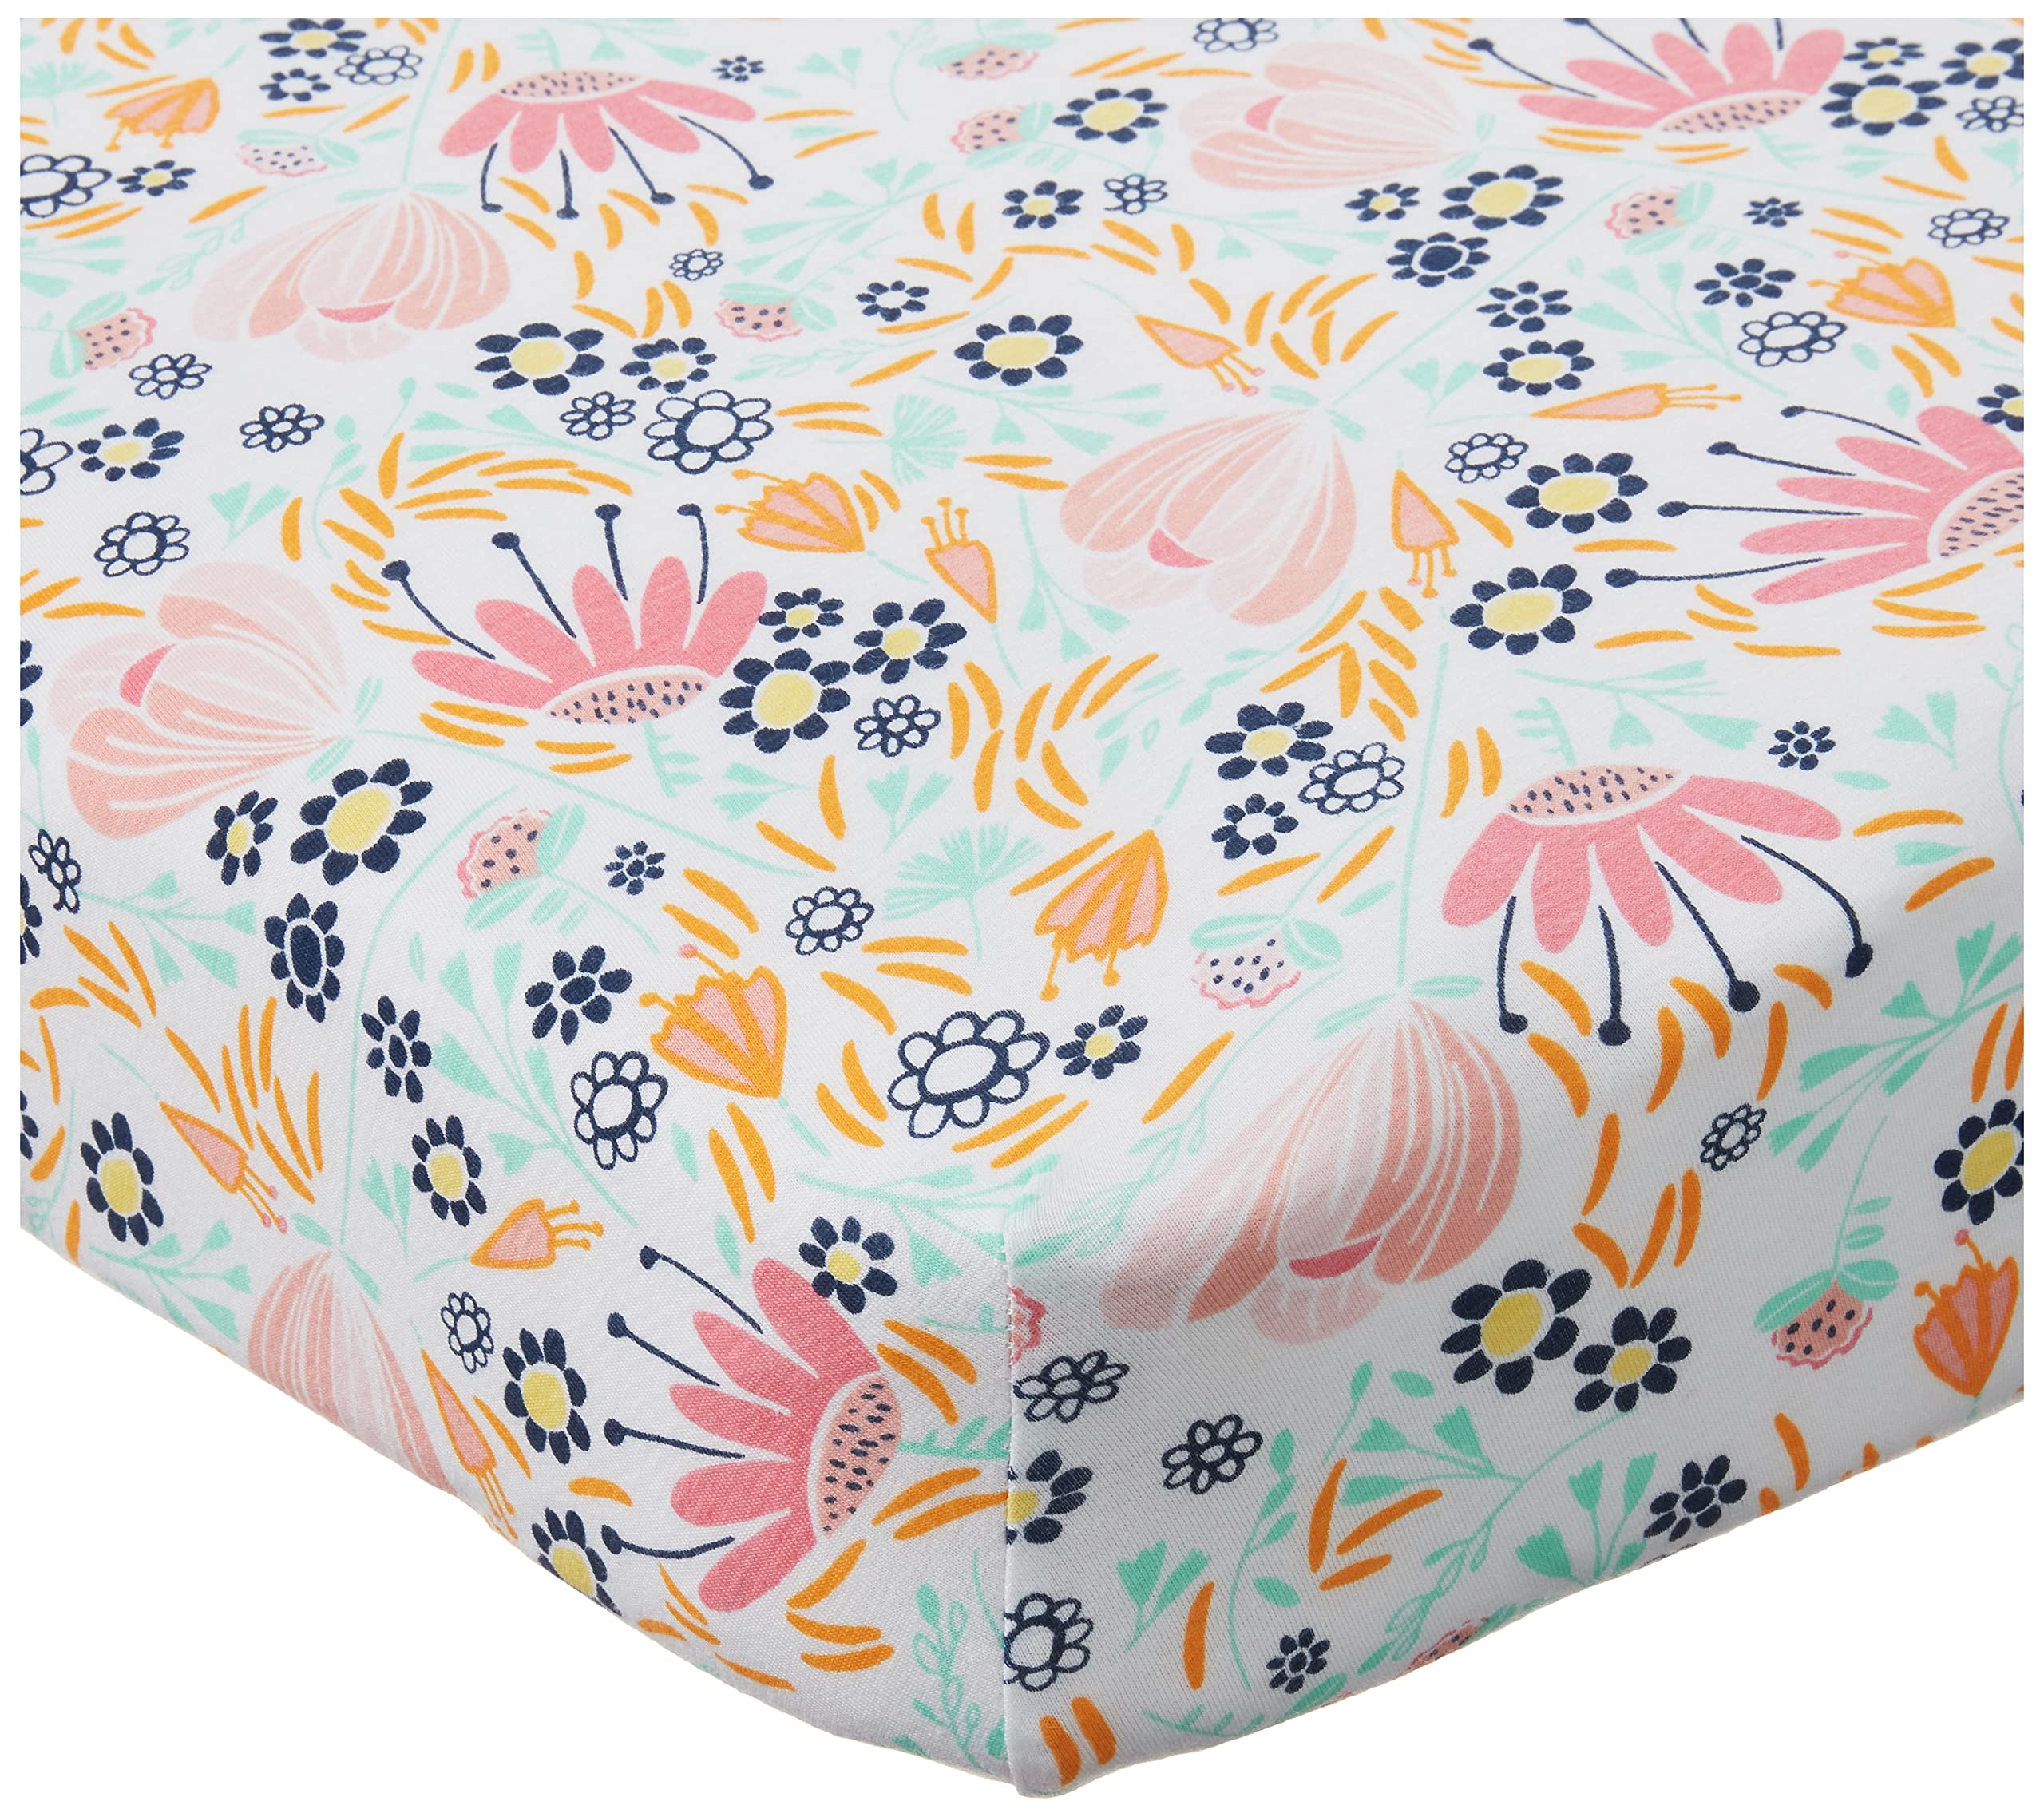 HonestBaby Organic Cotton Changing Pad Cover, Flower Power, One Size (D131E)